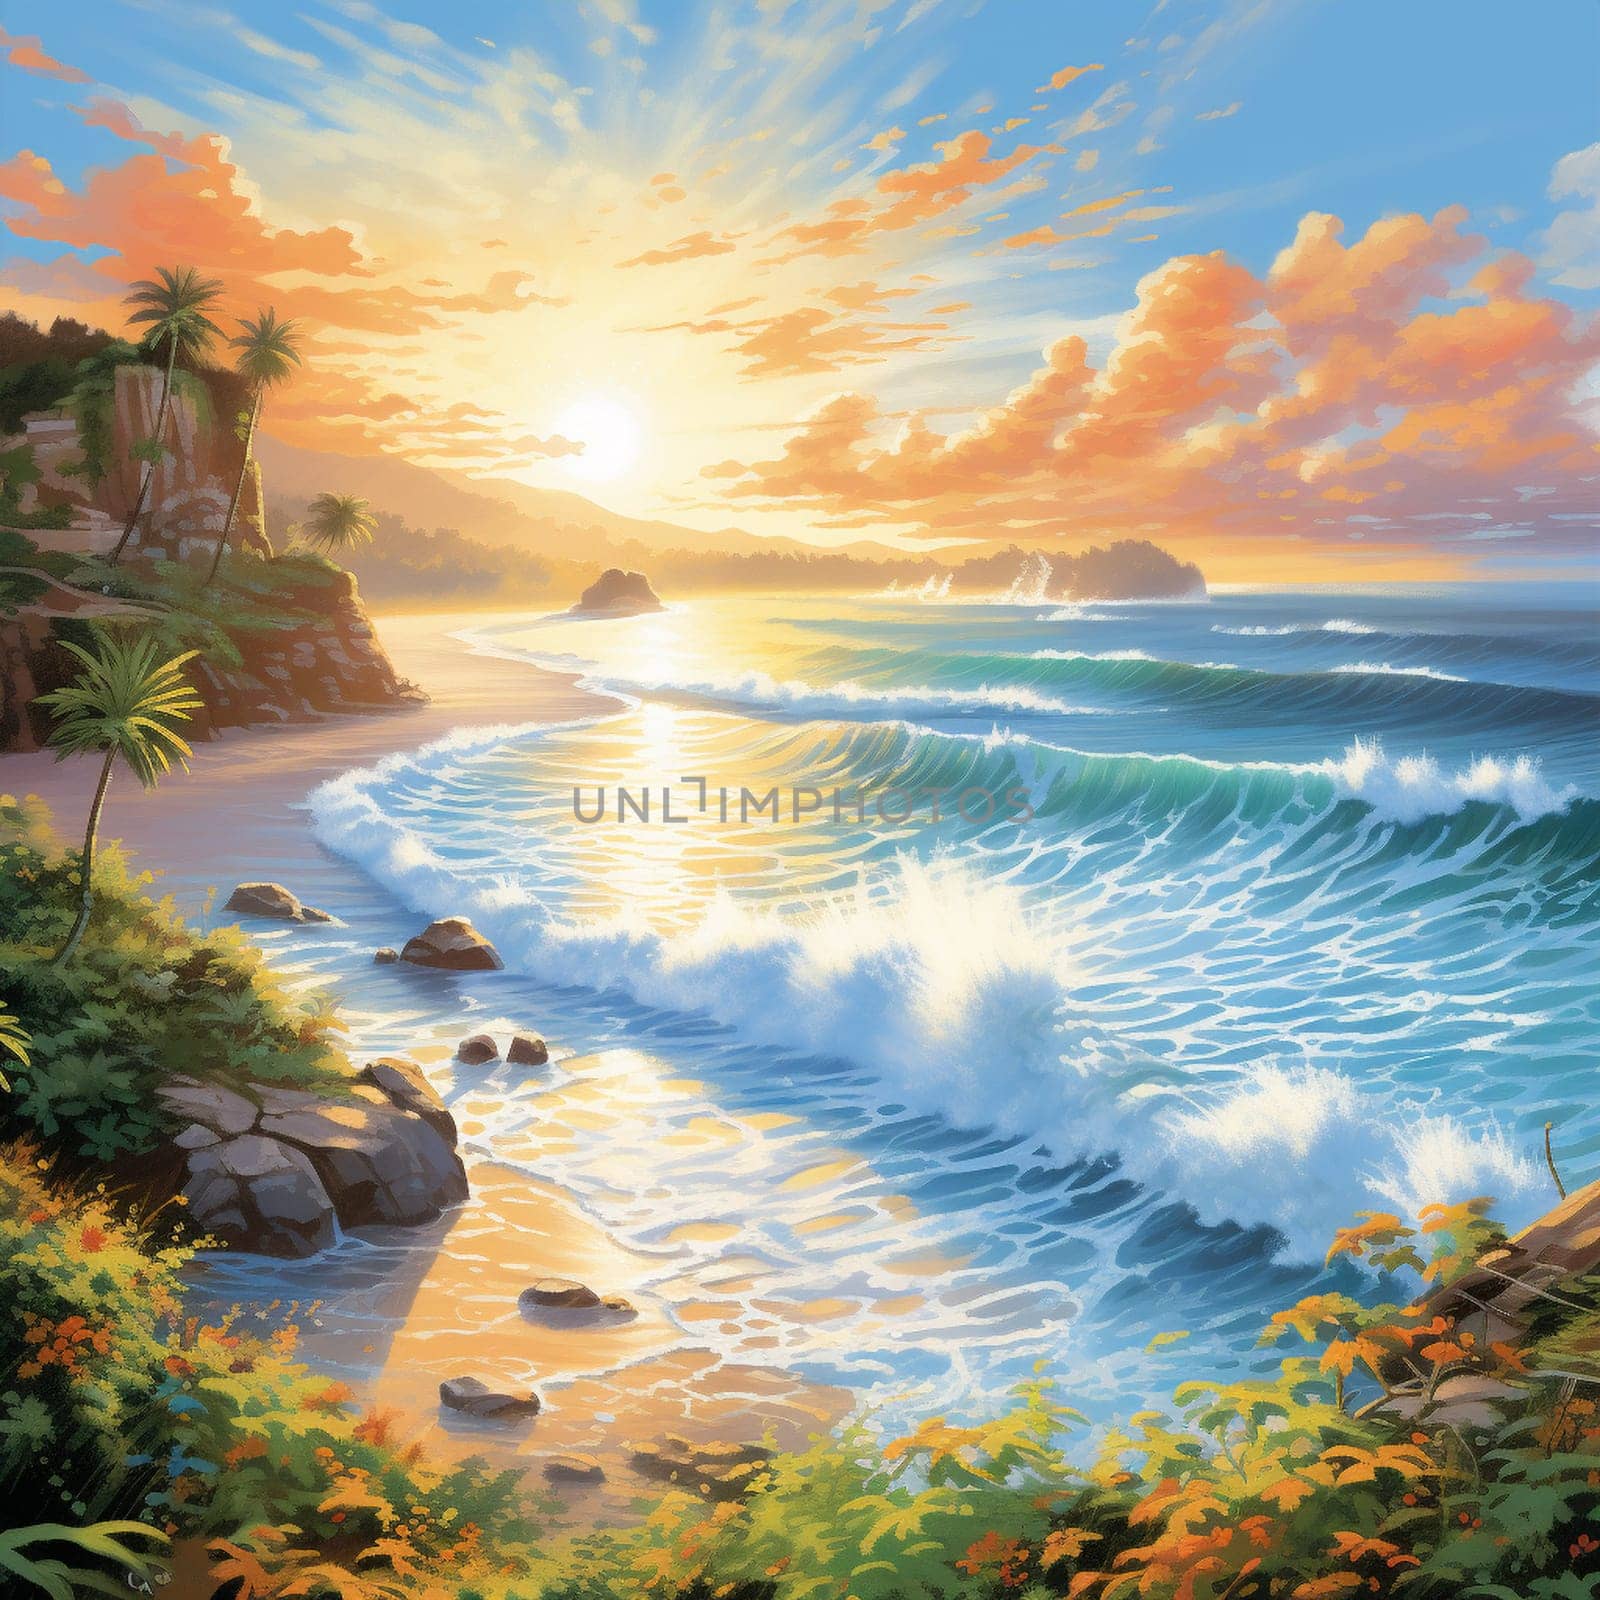 Immerse yourself in the serenity of Whispering Waves, an enchanting artwork that captures the beauty and tranquility of a picturesque coastline meeting a tranquil ocean. In this vibrant, illustrative art style, the gentle waves caress the shore, creating soothing ripples that seem to carry whispers of the ocean's secrets on the breeze. The soft color palette and dappled sunlight cast a warm glow over the landscape, evoking a sense of peacefulness and serenity. Transport yourself to this magical place where nature's whispers embrace you and discover the hidden mysteries of the sea.